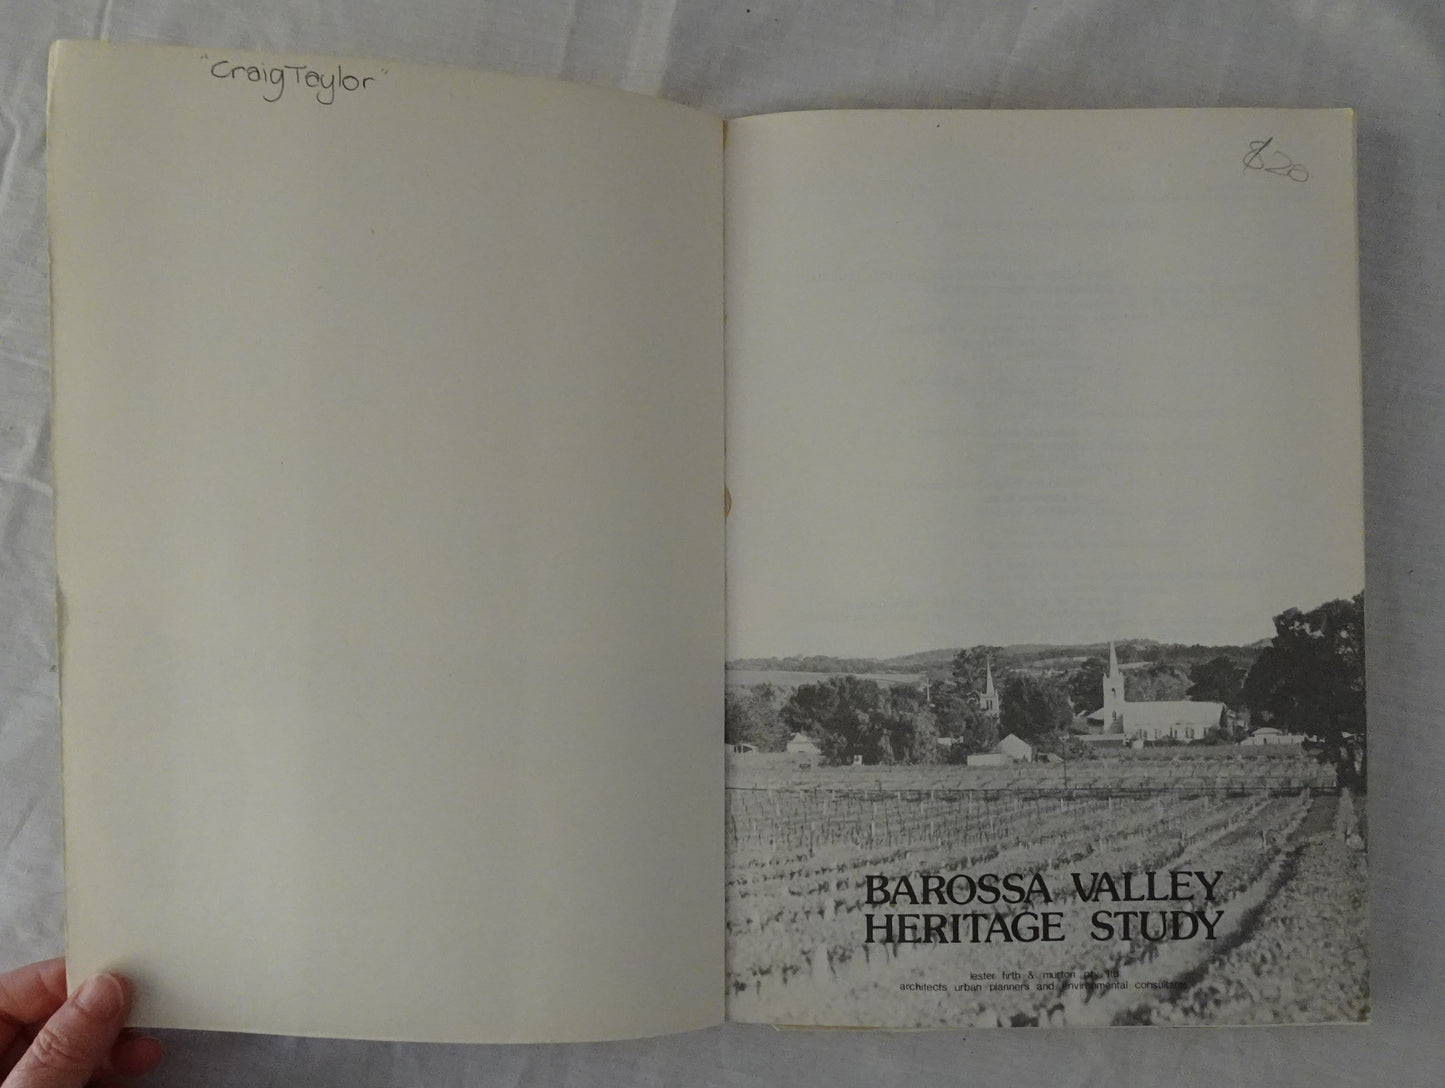 Barossa Valley Heritage Study by Lester, Firth and Murton